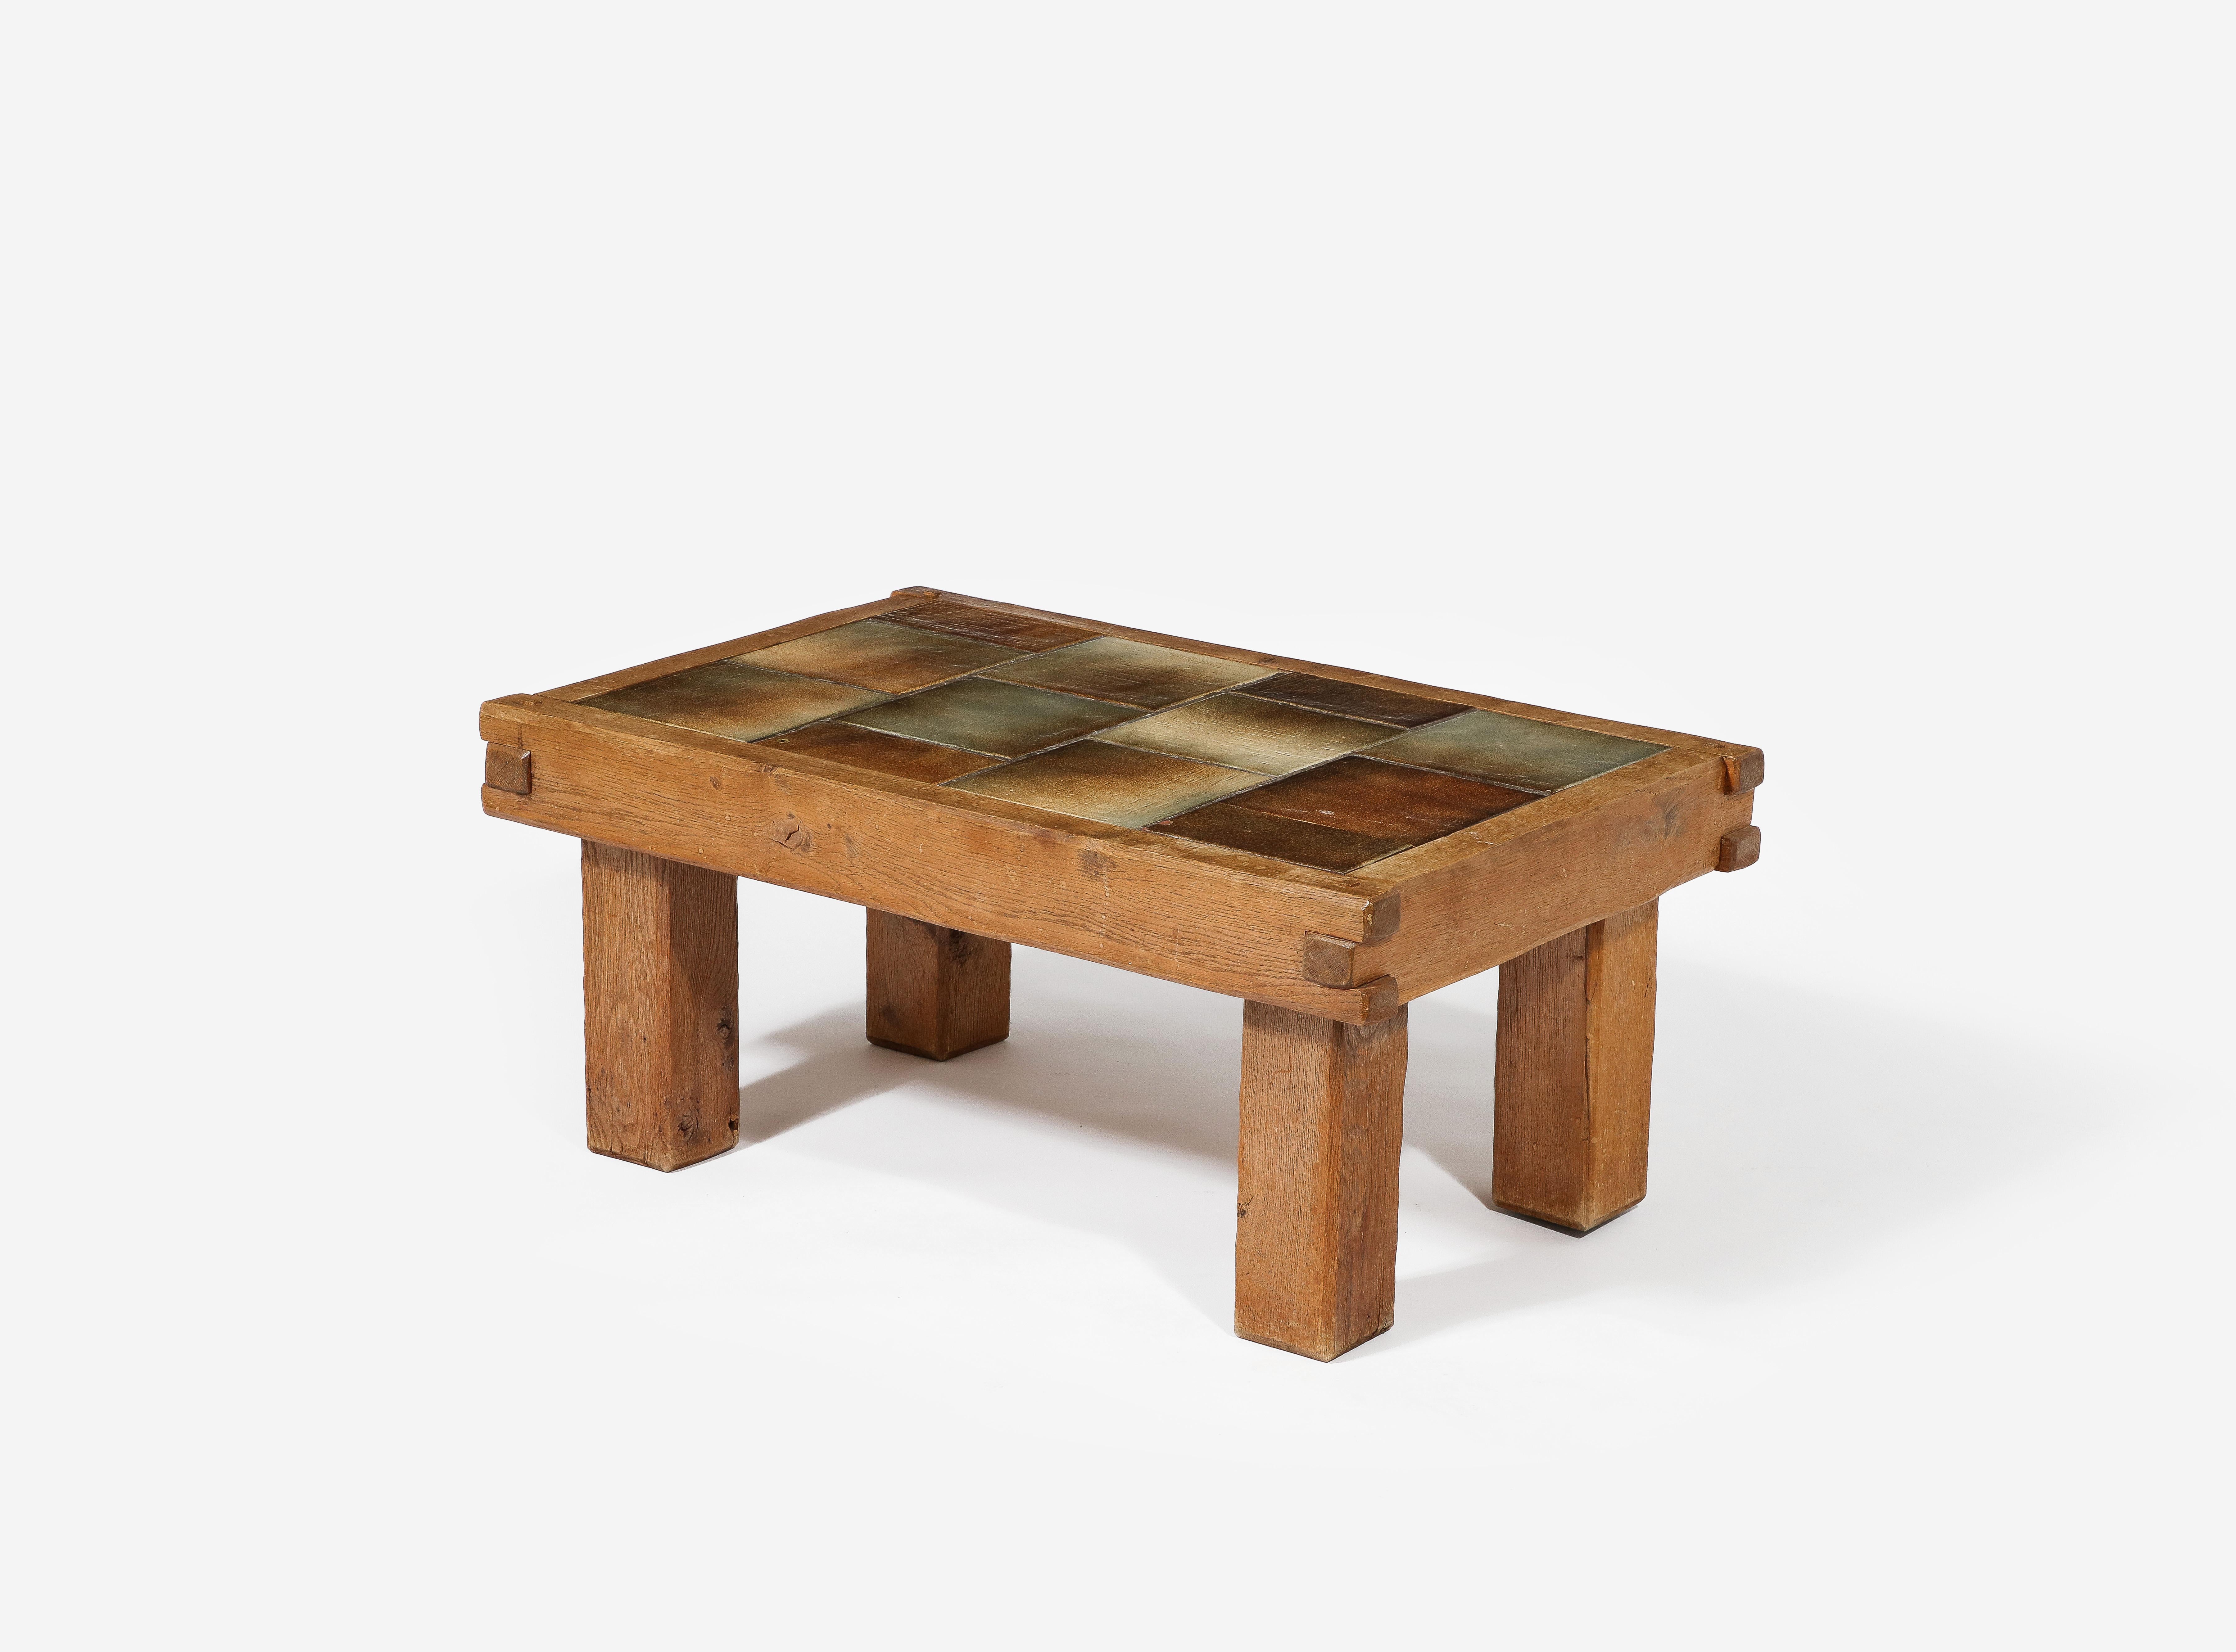 20th Century Small Brutalist Coffee Table with Ceramic Tile Top & Oak, France 1960's For Sale